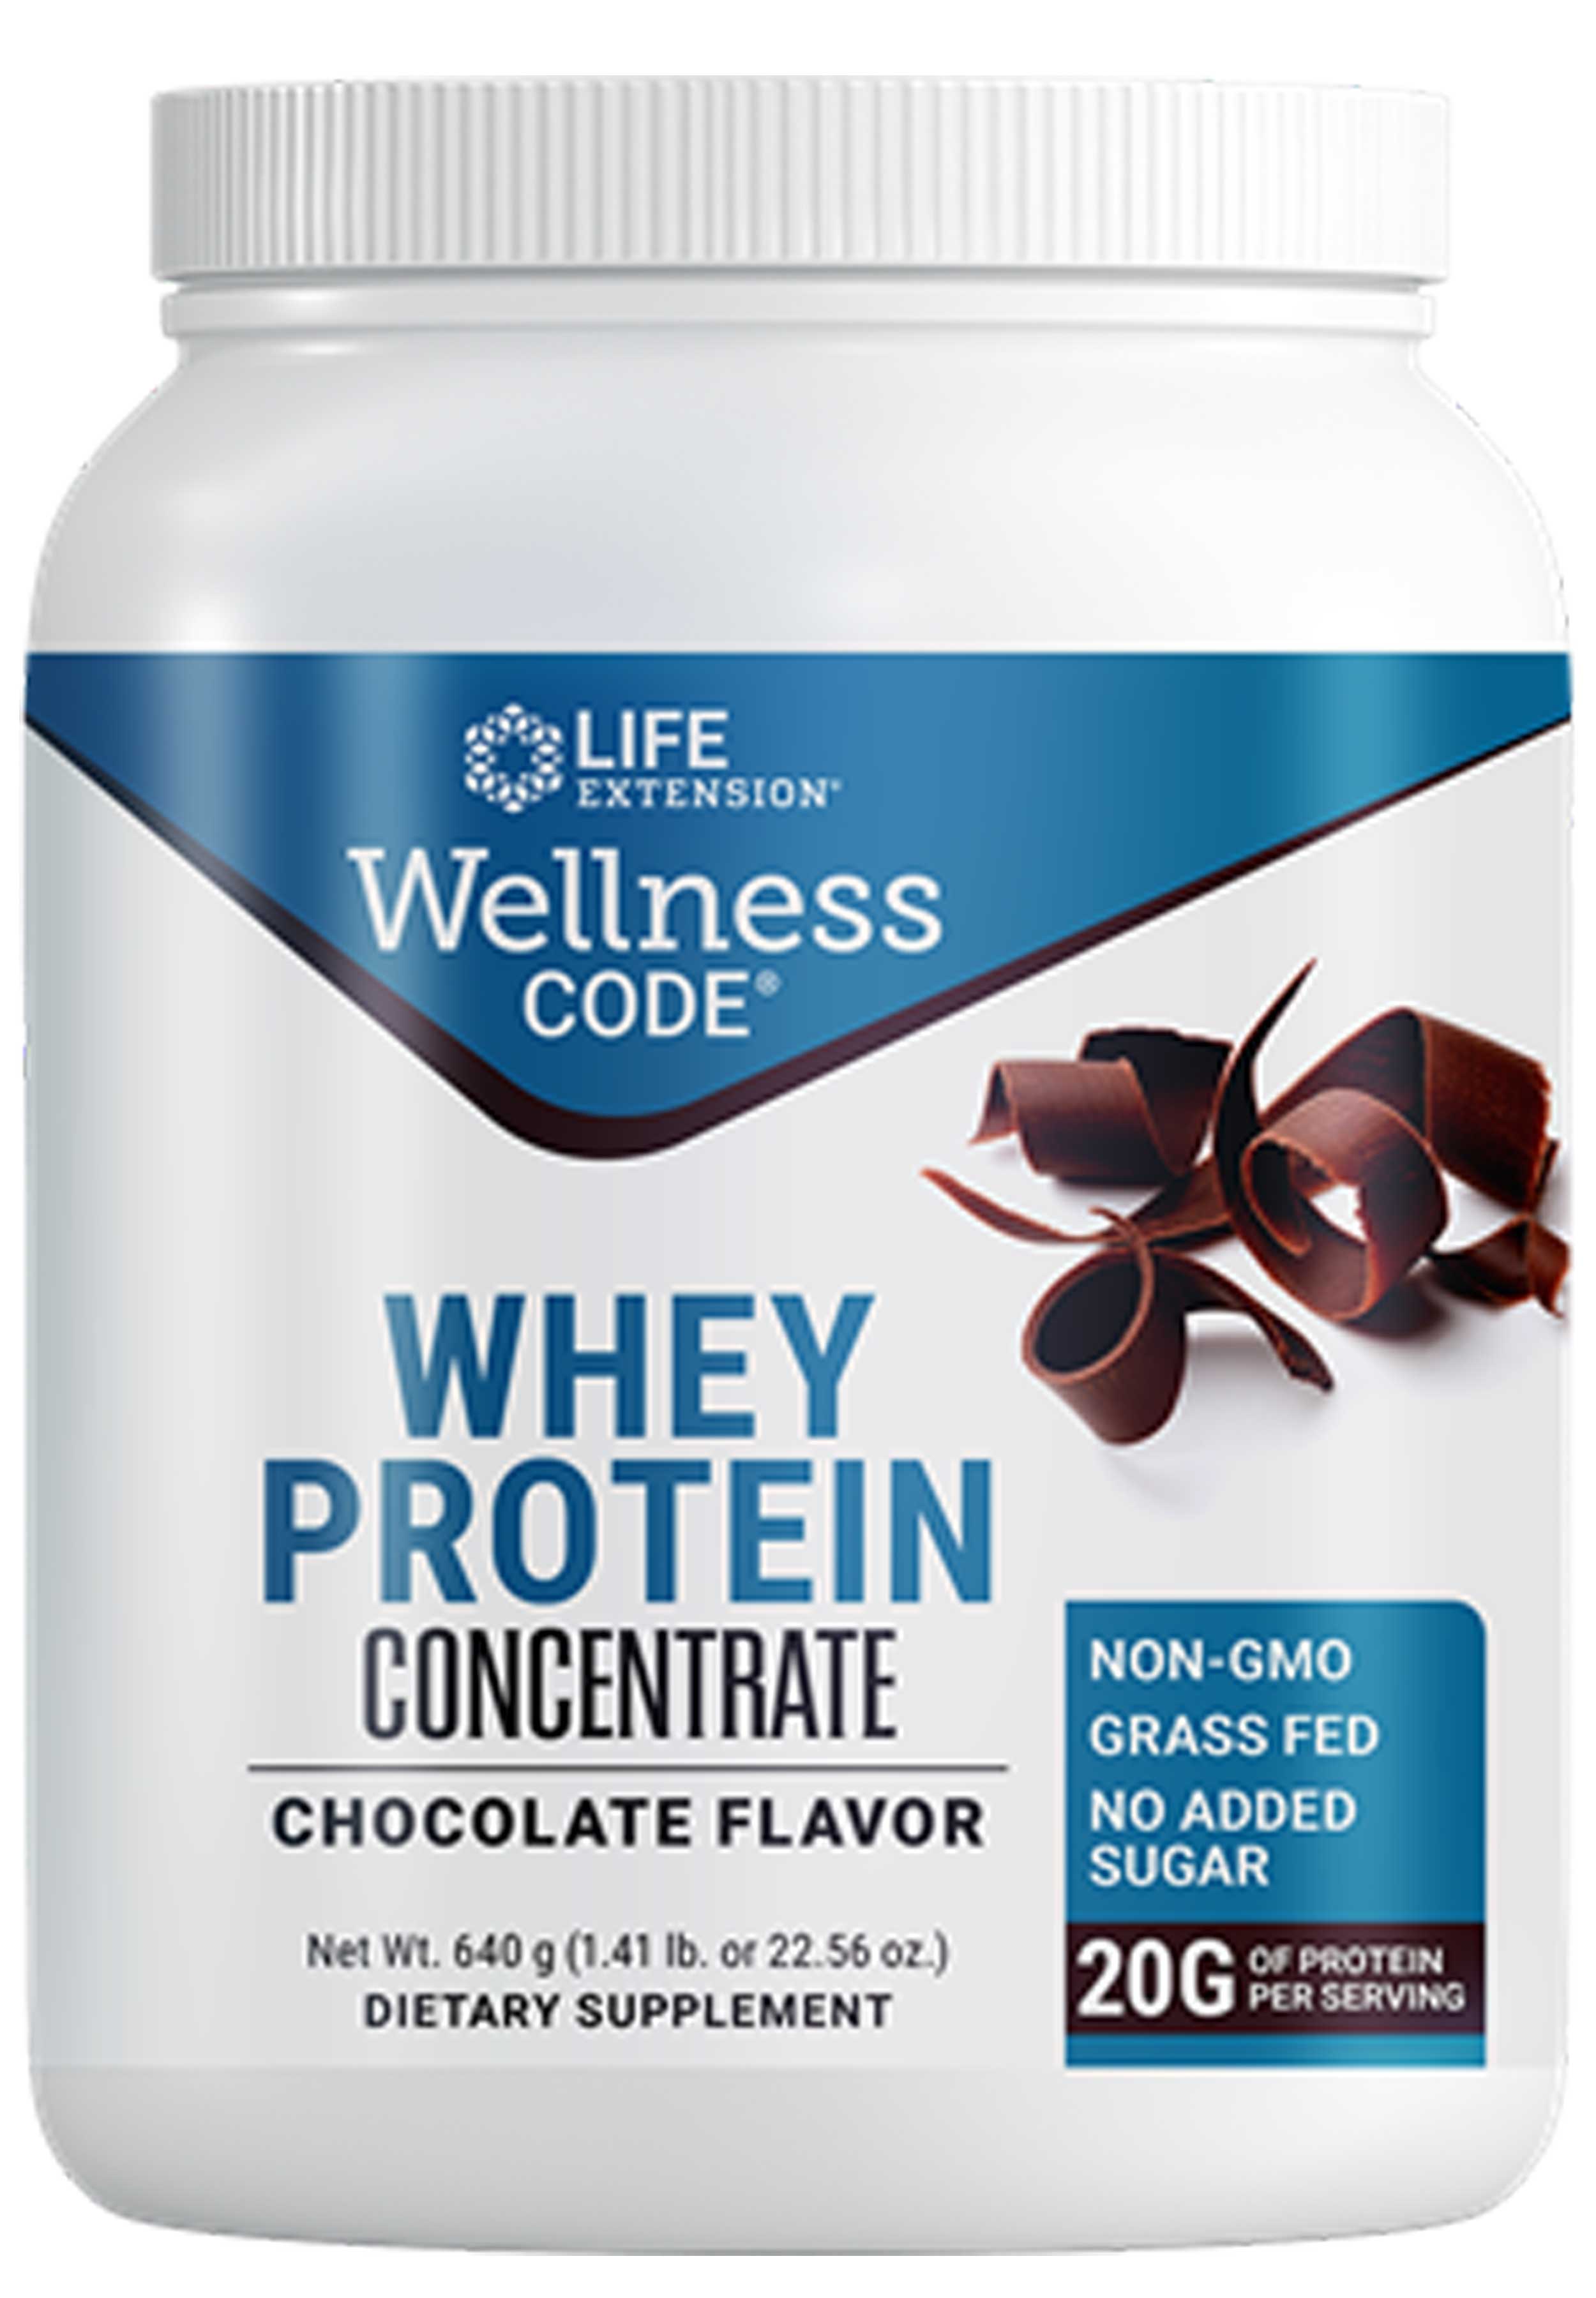 Life Extension Wellness Code Whey Protein Concentrate Chocolate